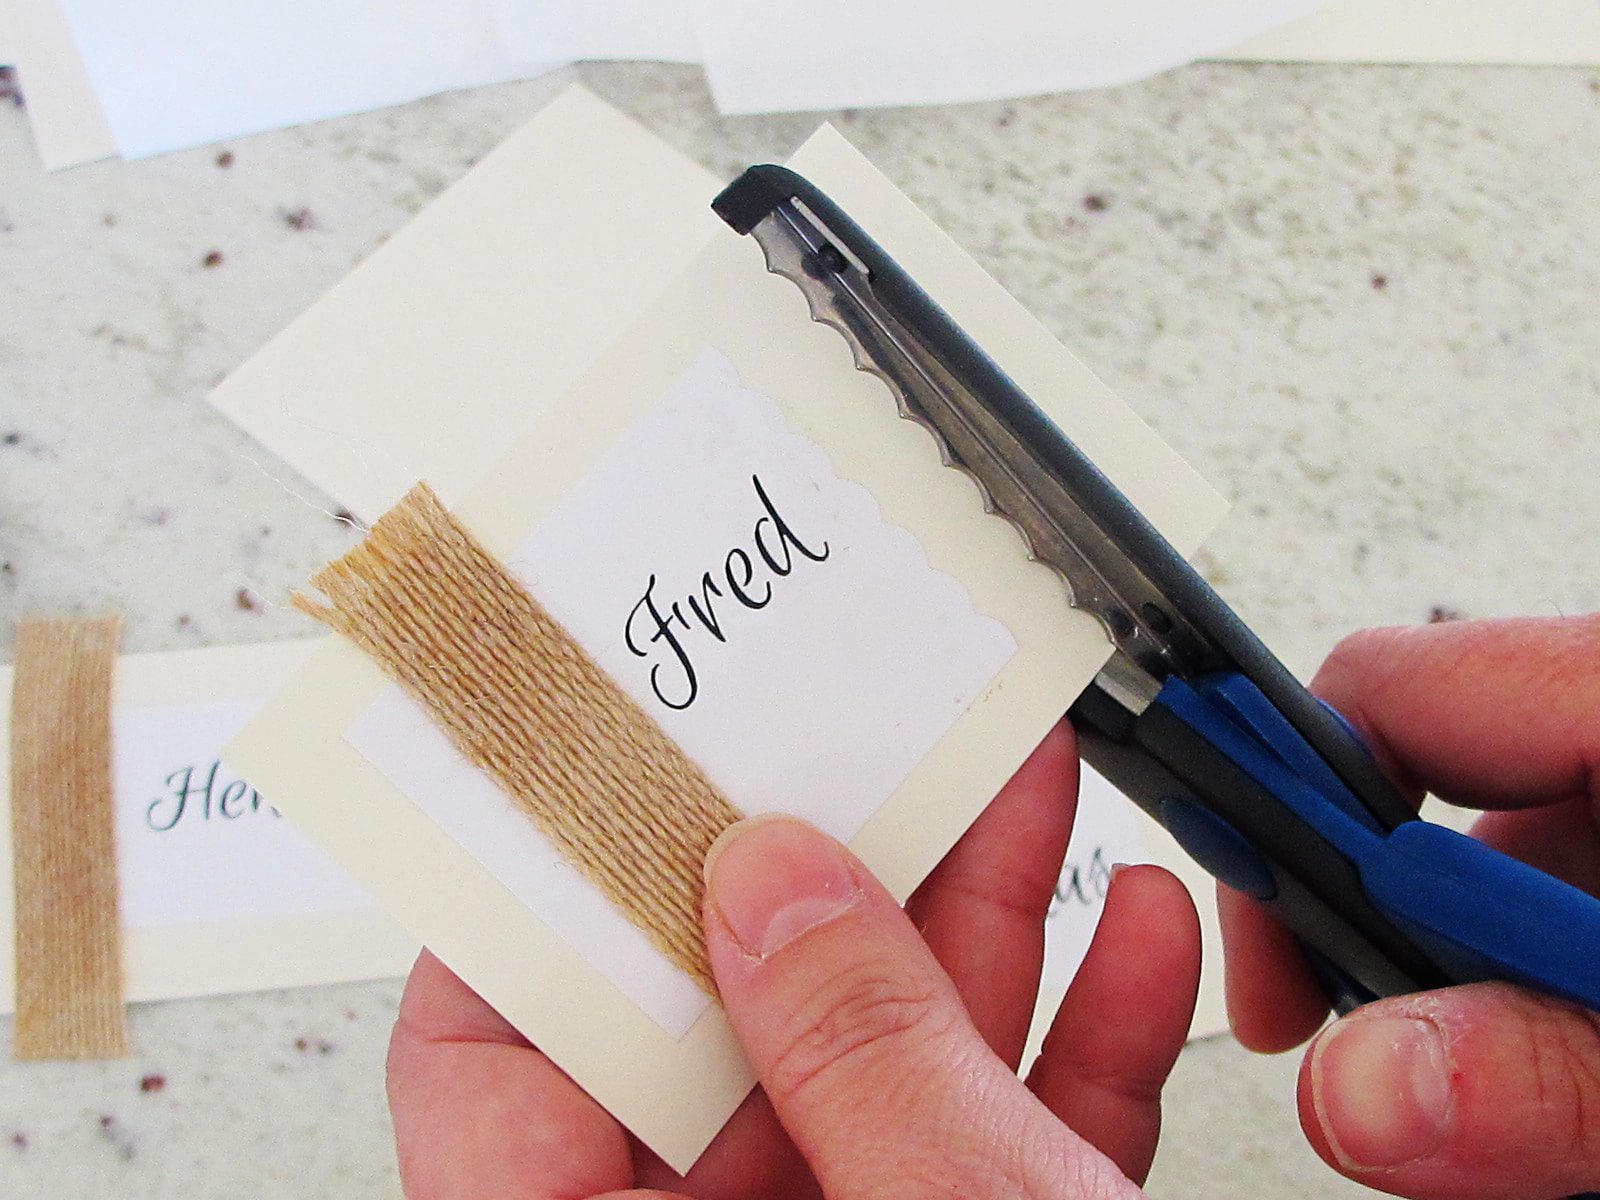 trimming edge of a place card with decorative scissors